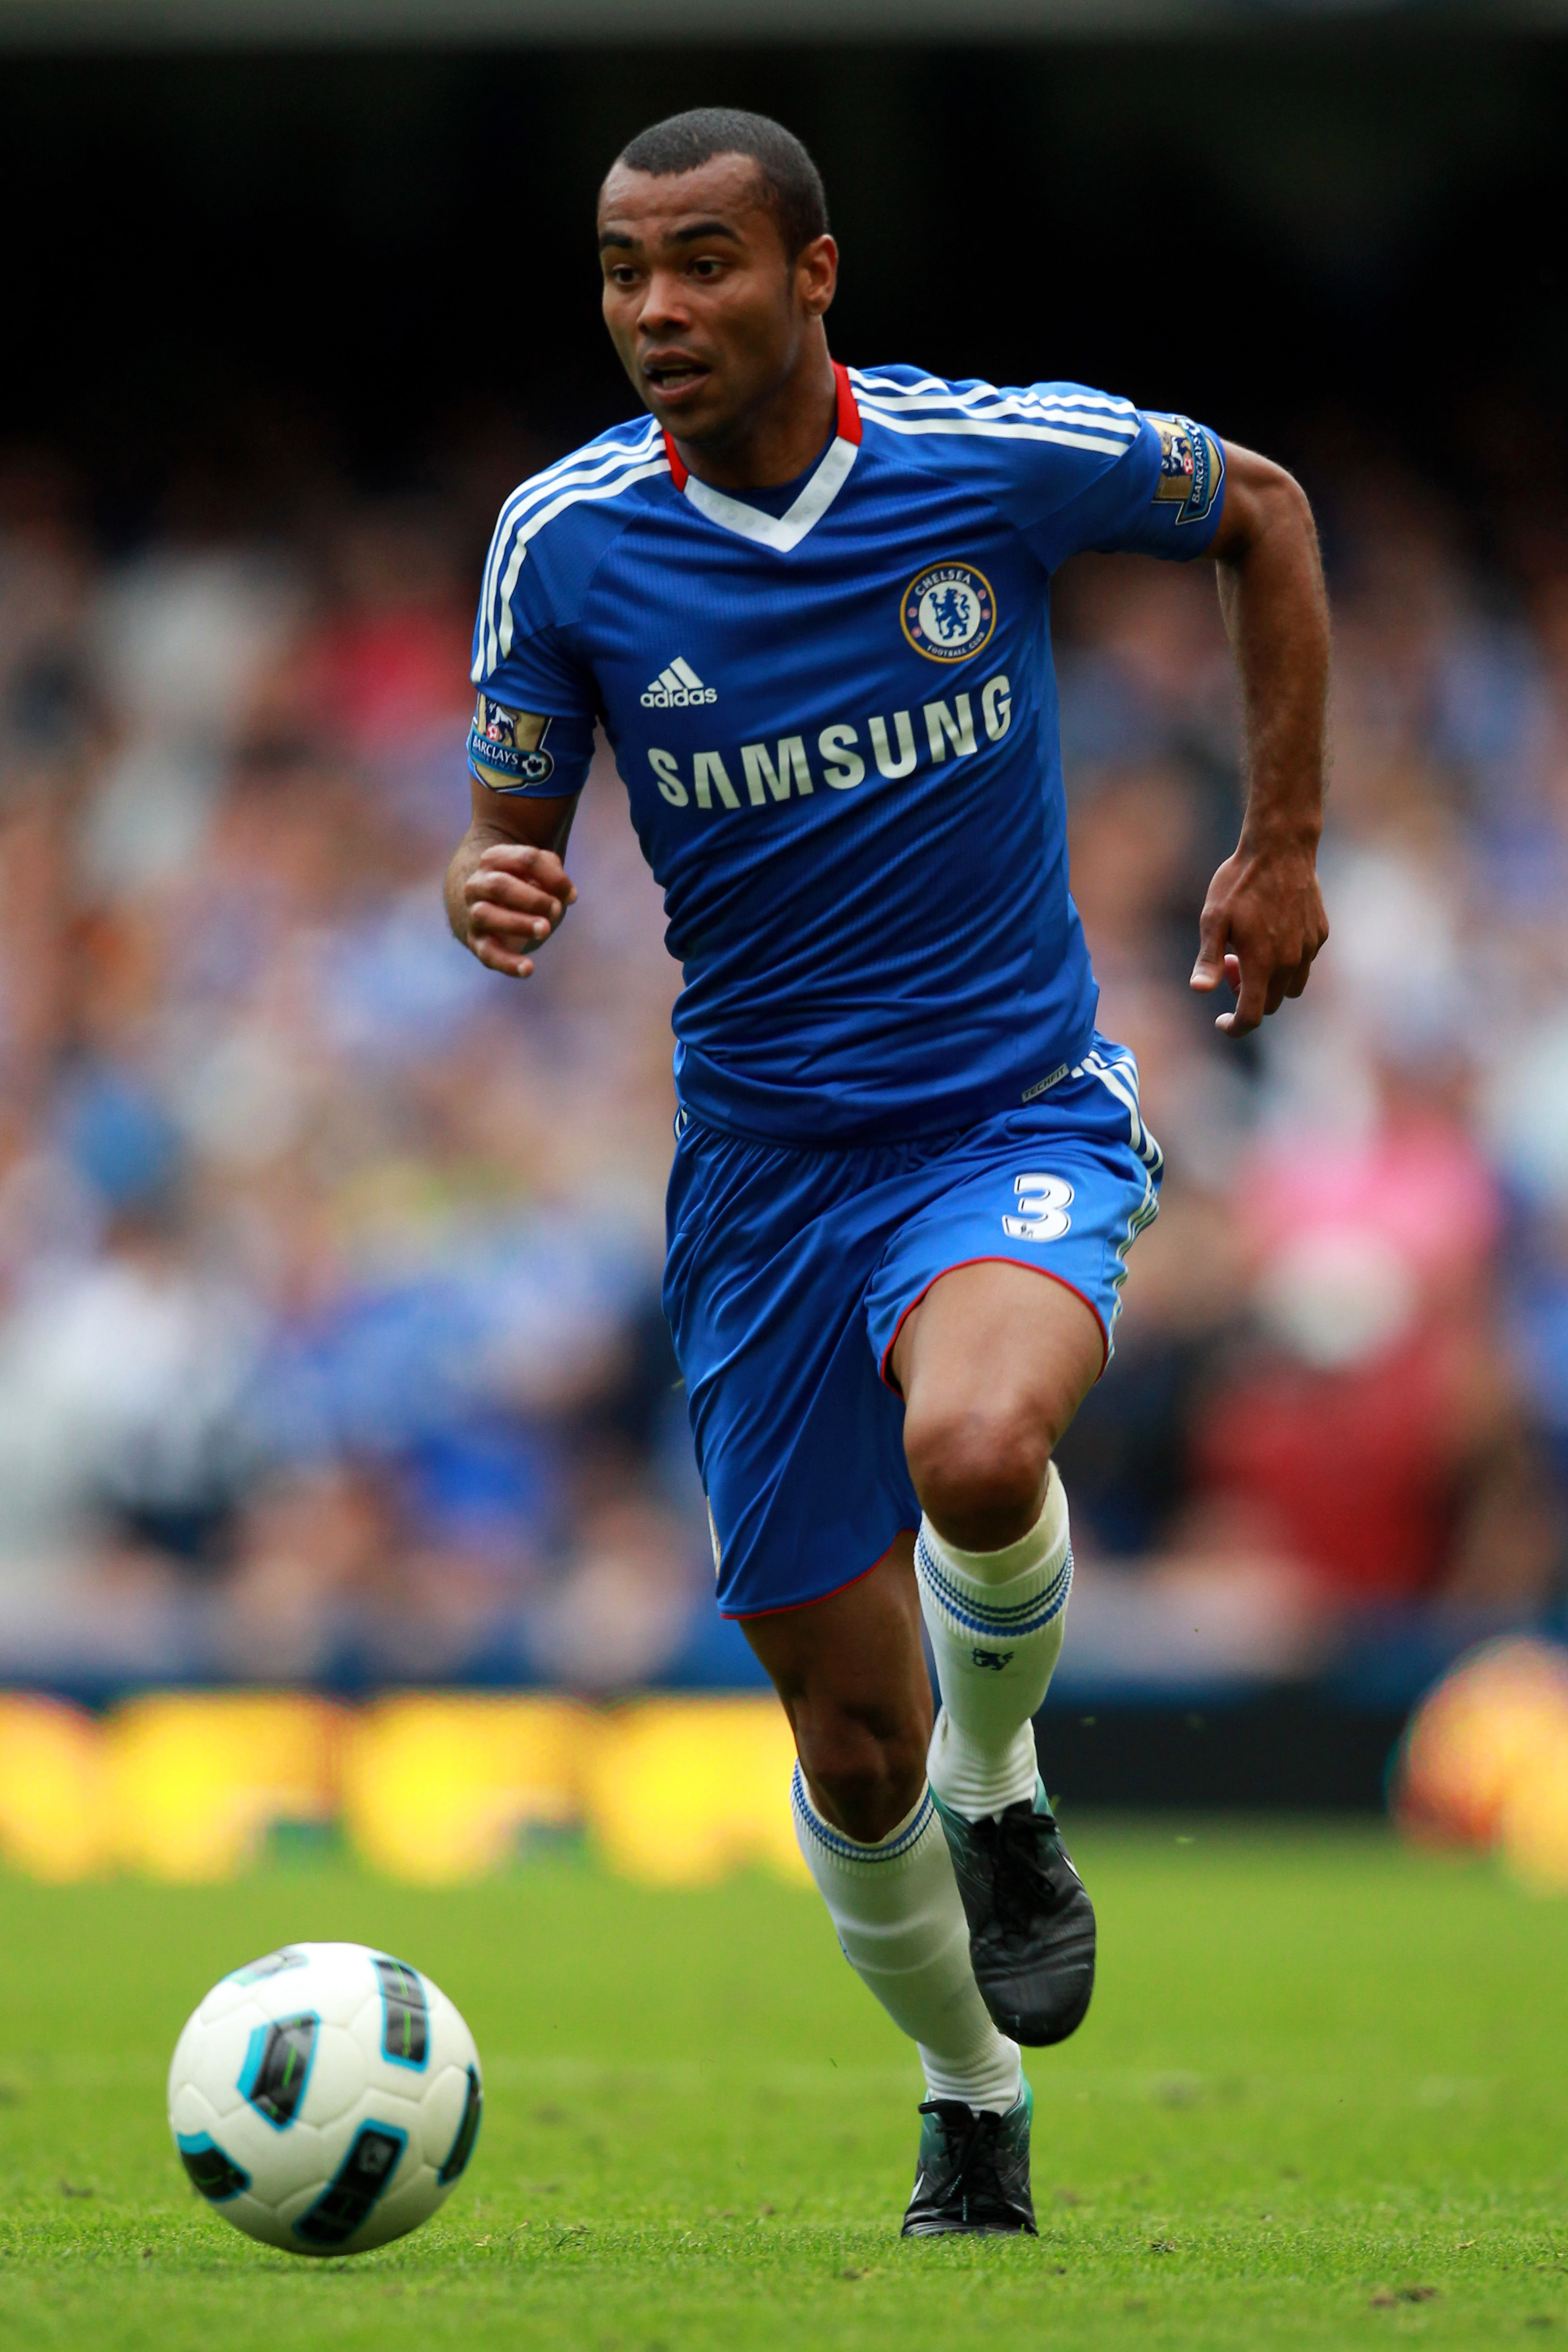 LONDON, ENGLAND - SEPTEMBER 19:  Ashley Cole of Chelsea runs with the ball during the Barclays Premier League match between Chelsea and Blackpool at Stamford Bridge on September 19, 2010 in London, England.  (Photo by Warren Little/Getty Images)